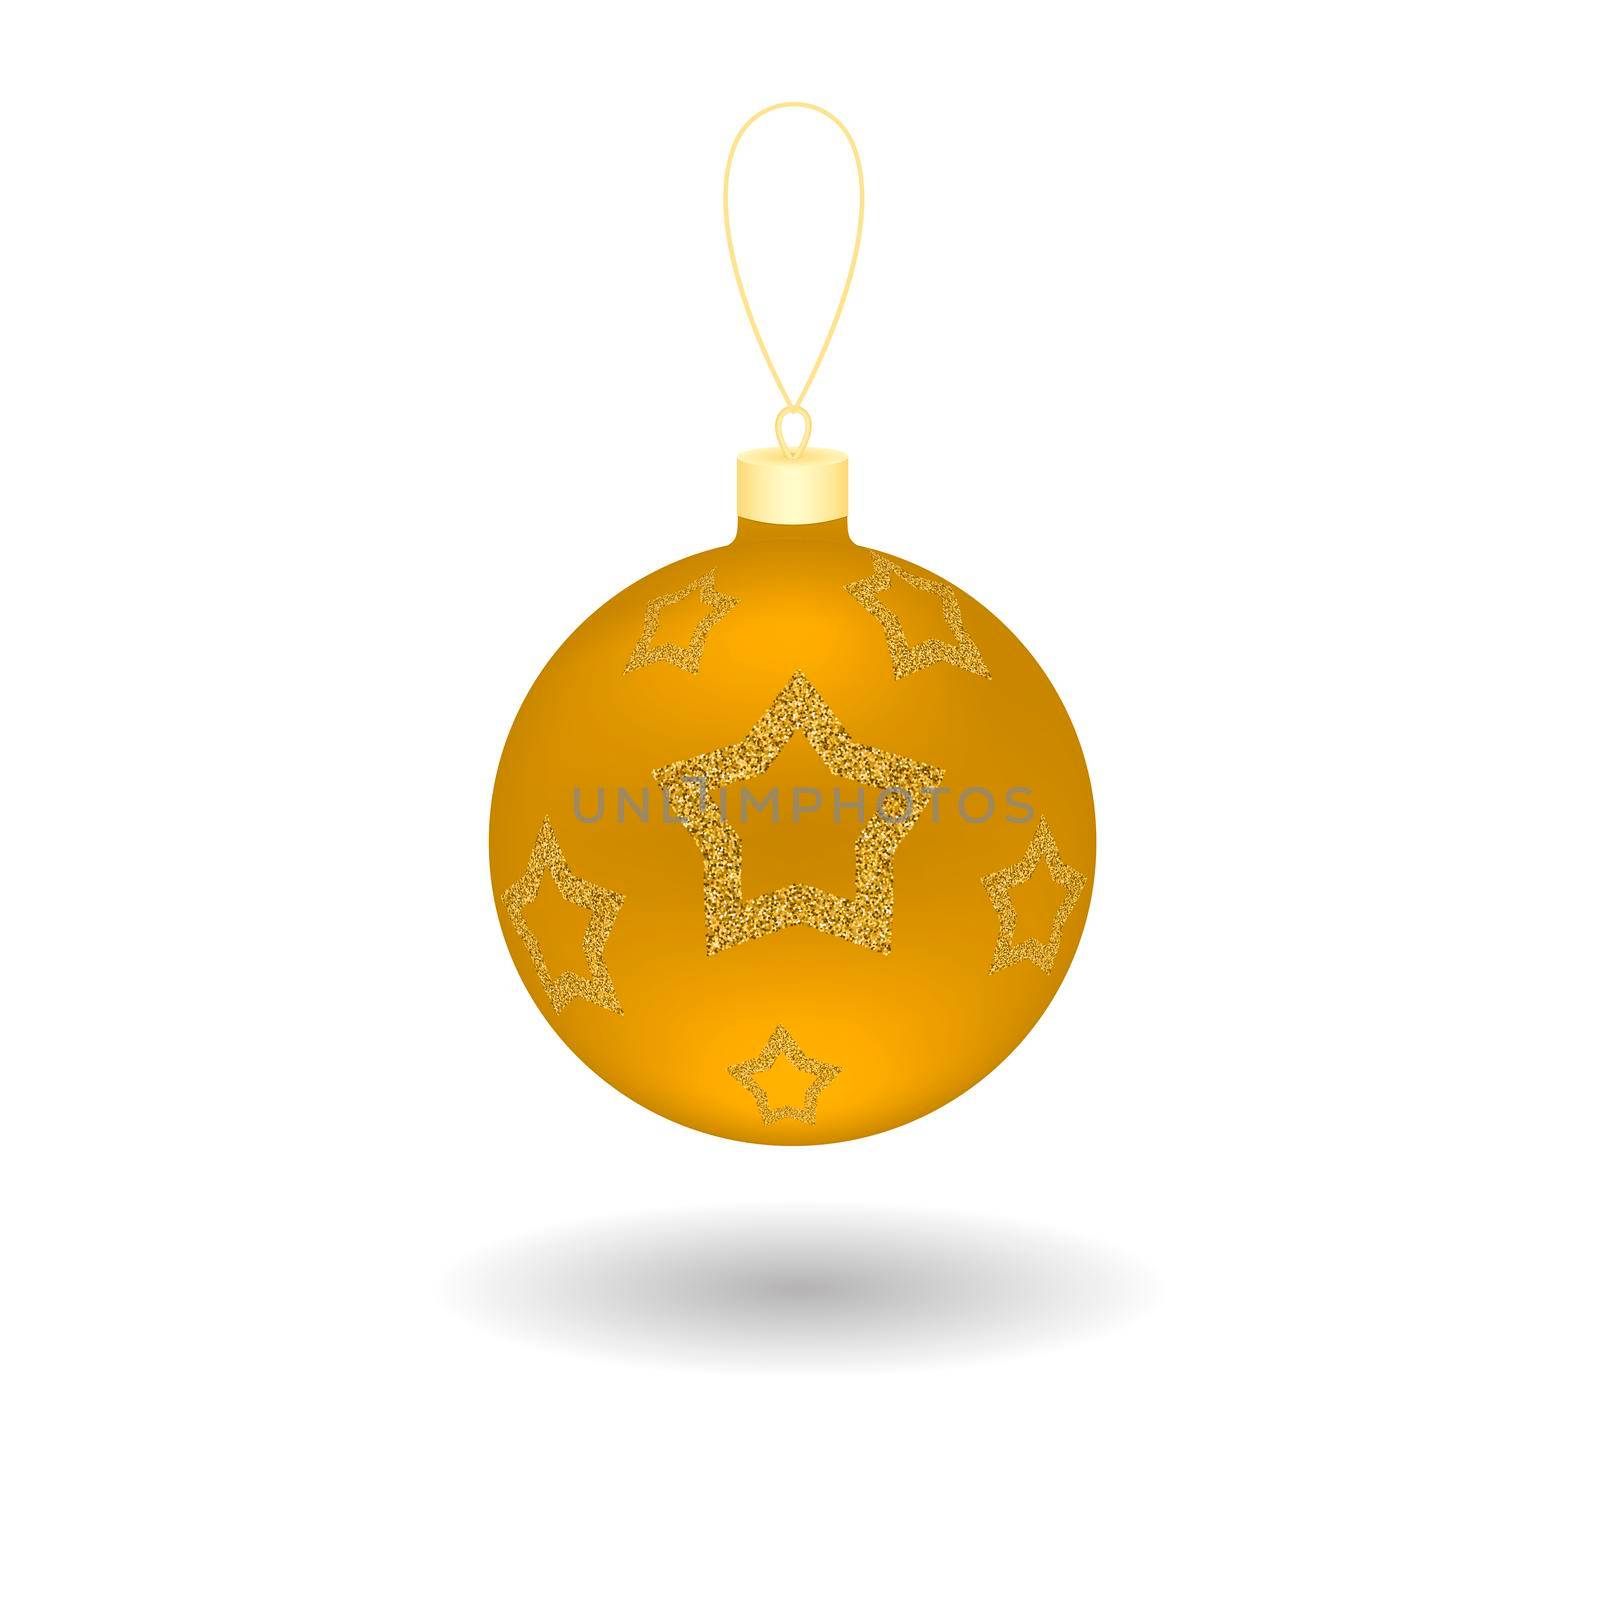 Yellow realistic christmas ball with glitter pattern. illustration isolated on white background for design of greeting cards, banners, flyers and much more by Marin4ik